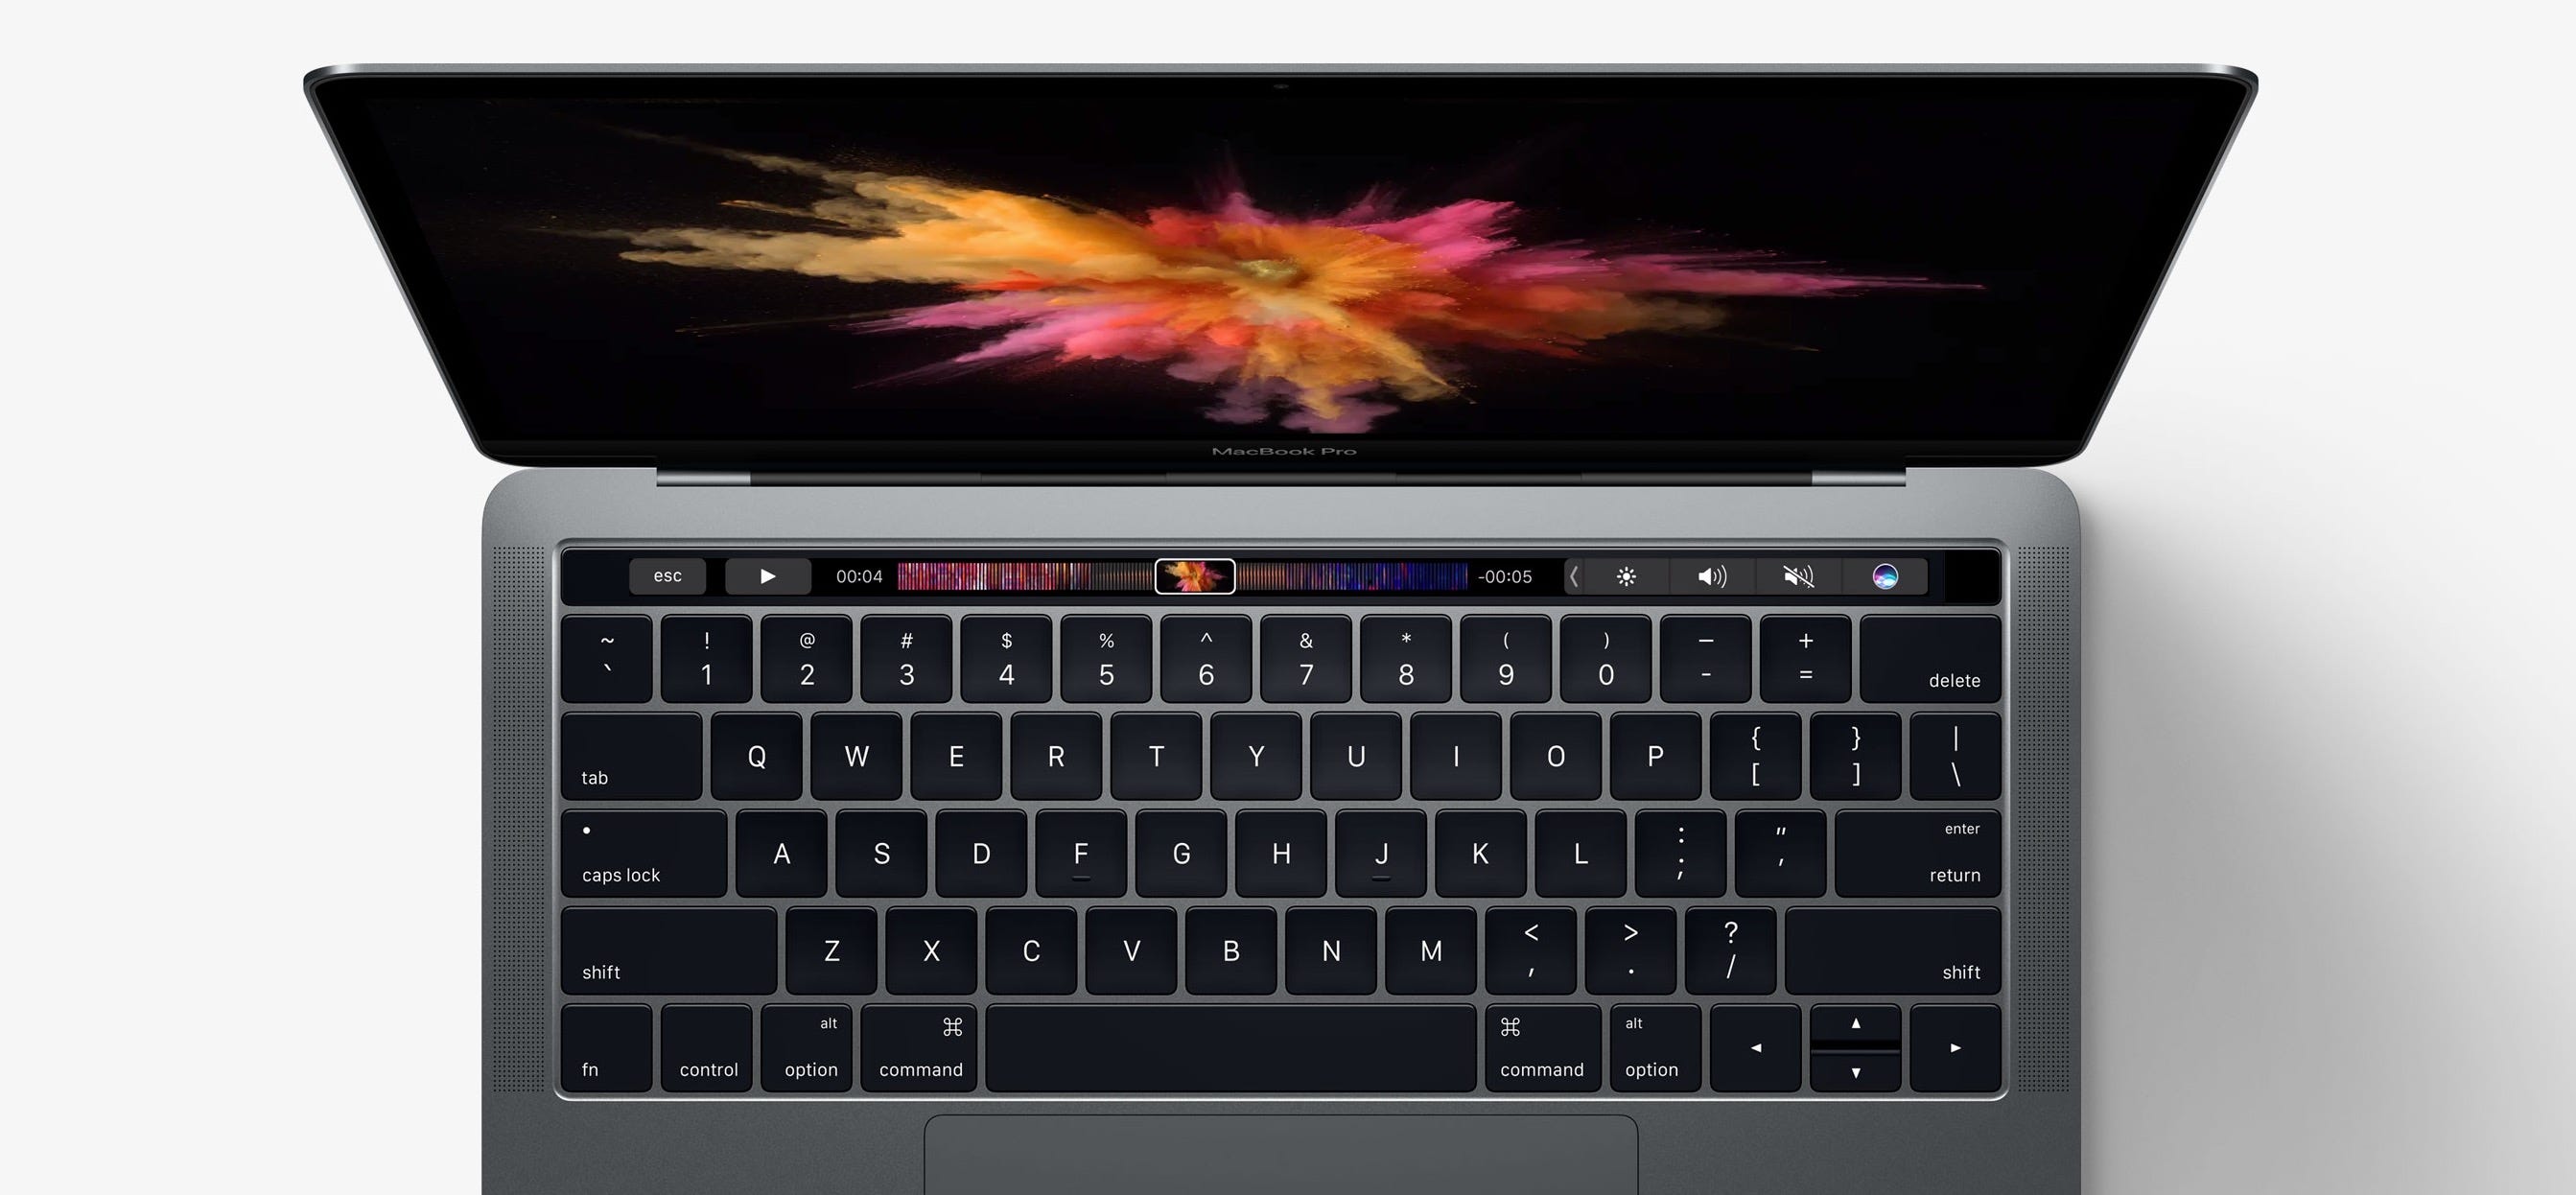 Apple's most exciting MacBook yet could arrive at WWDC